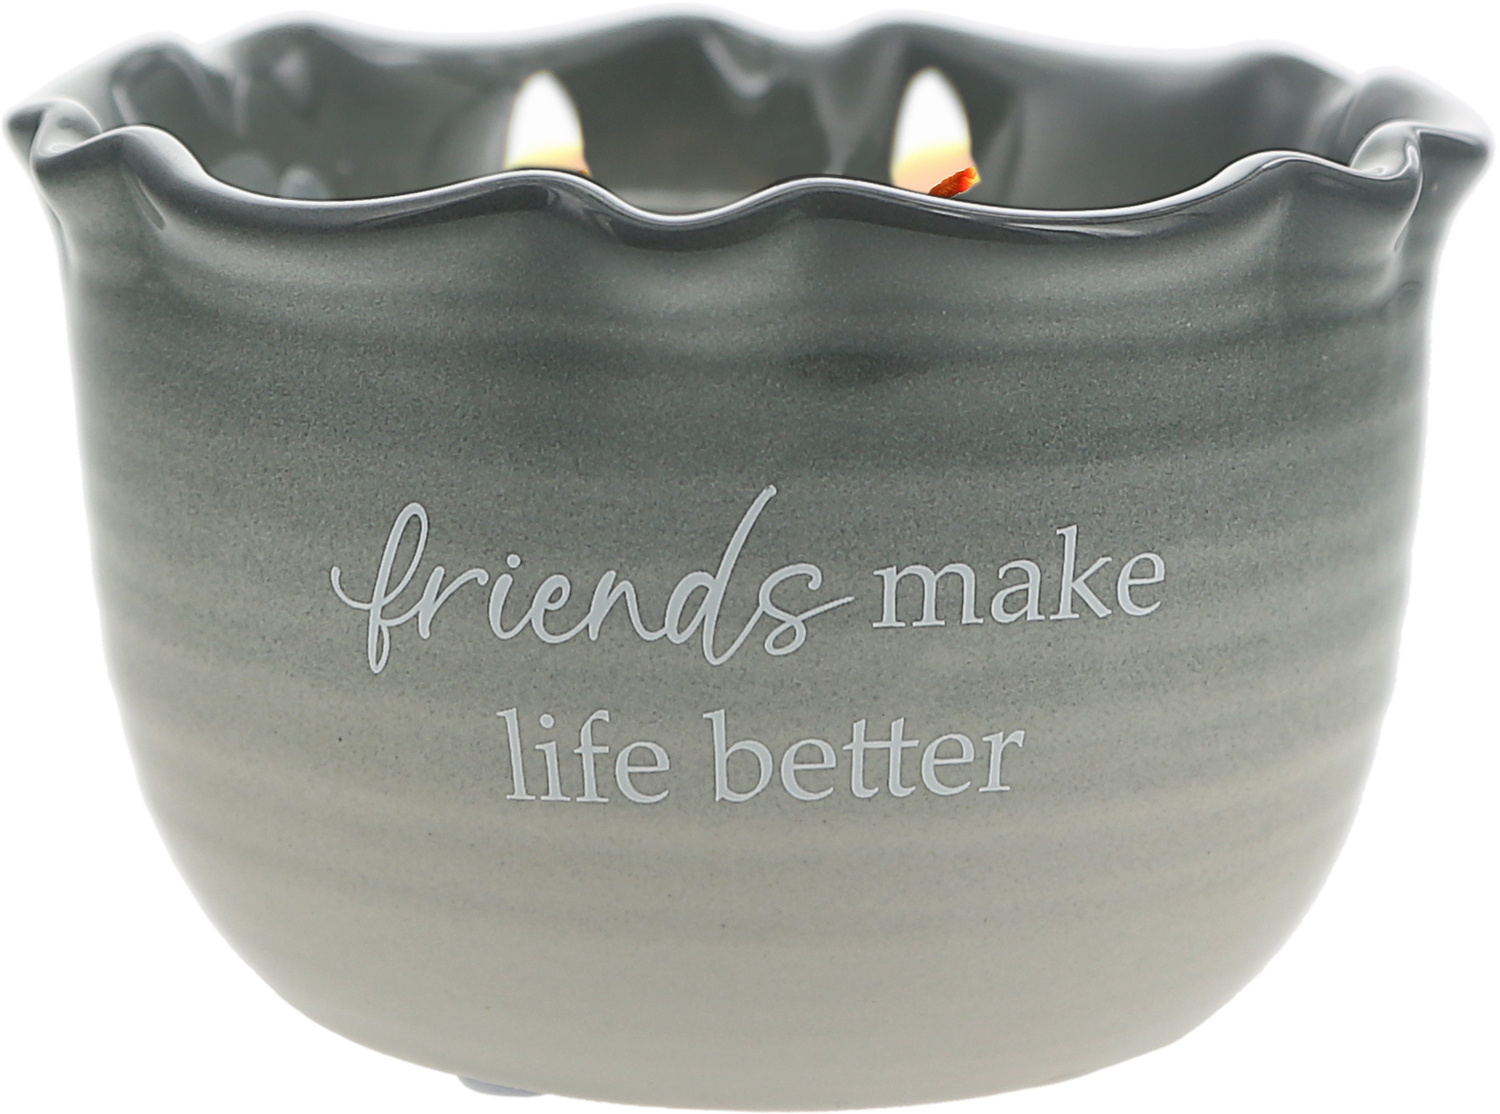 Friends by Thoughts of Home - Friends - 11 oz - 100% Soy Wax Reveal Candle
Scent: Tranquility